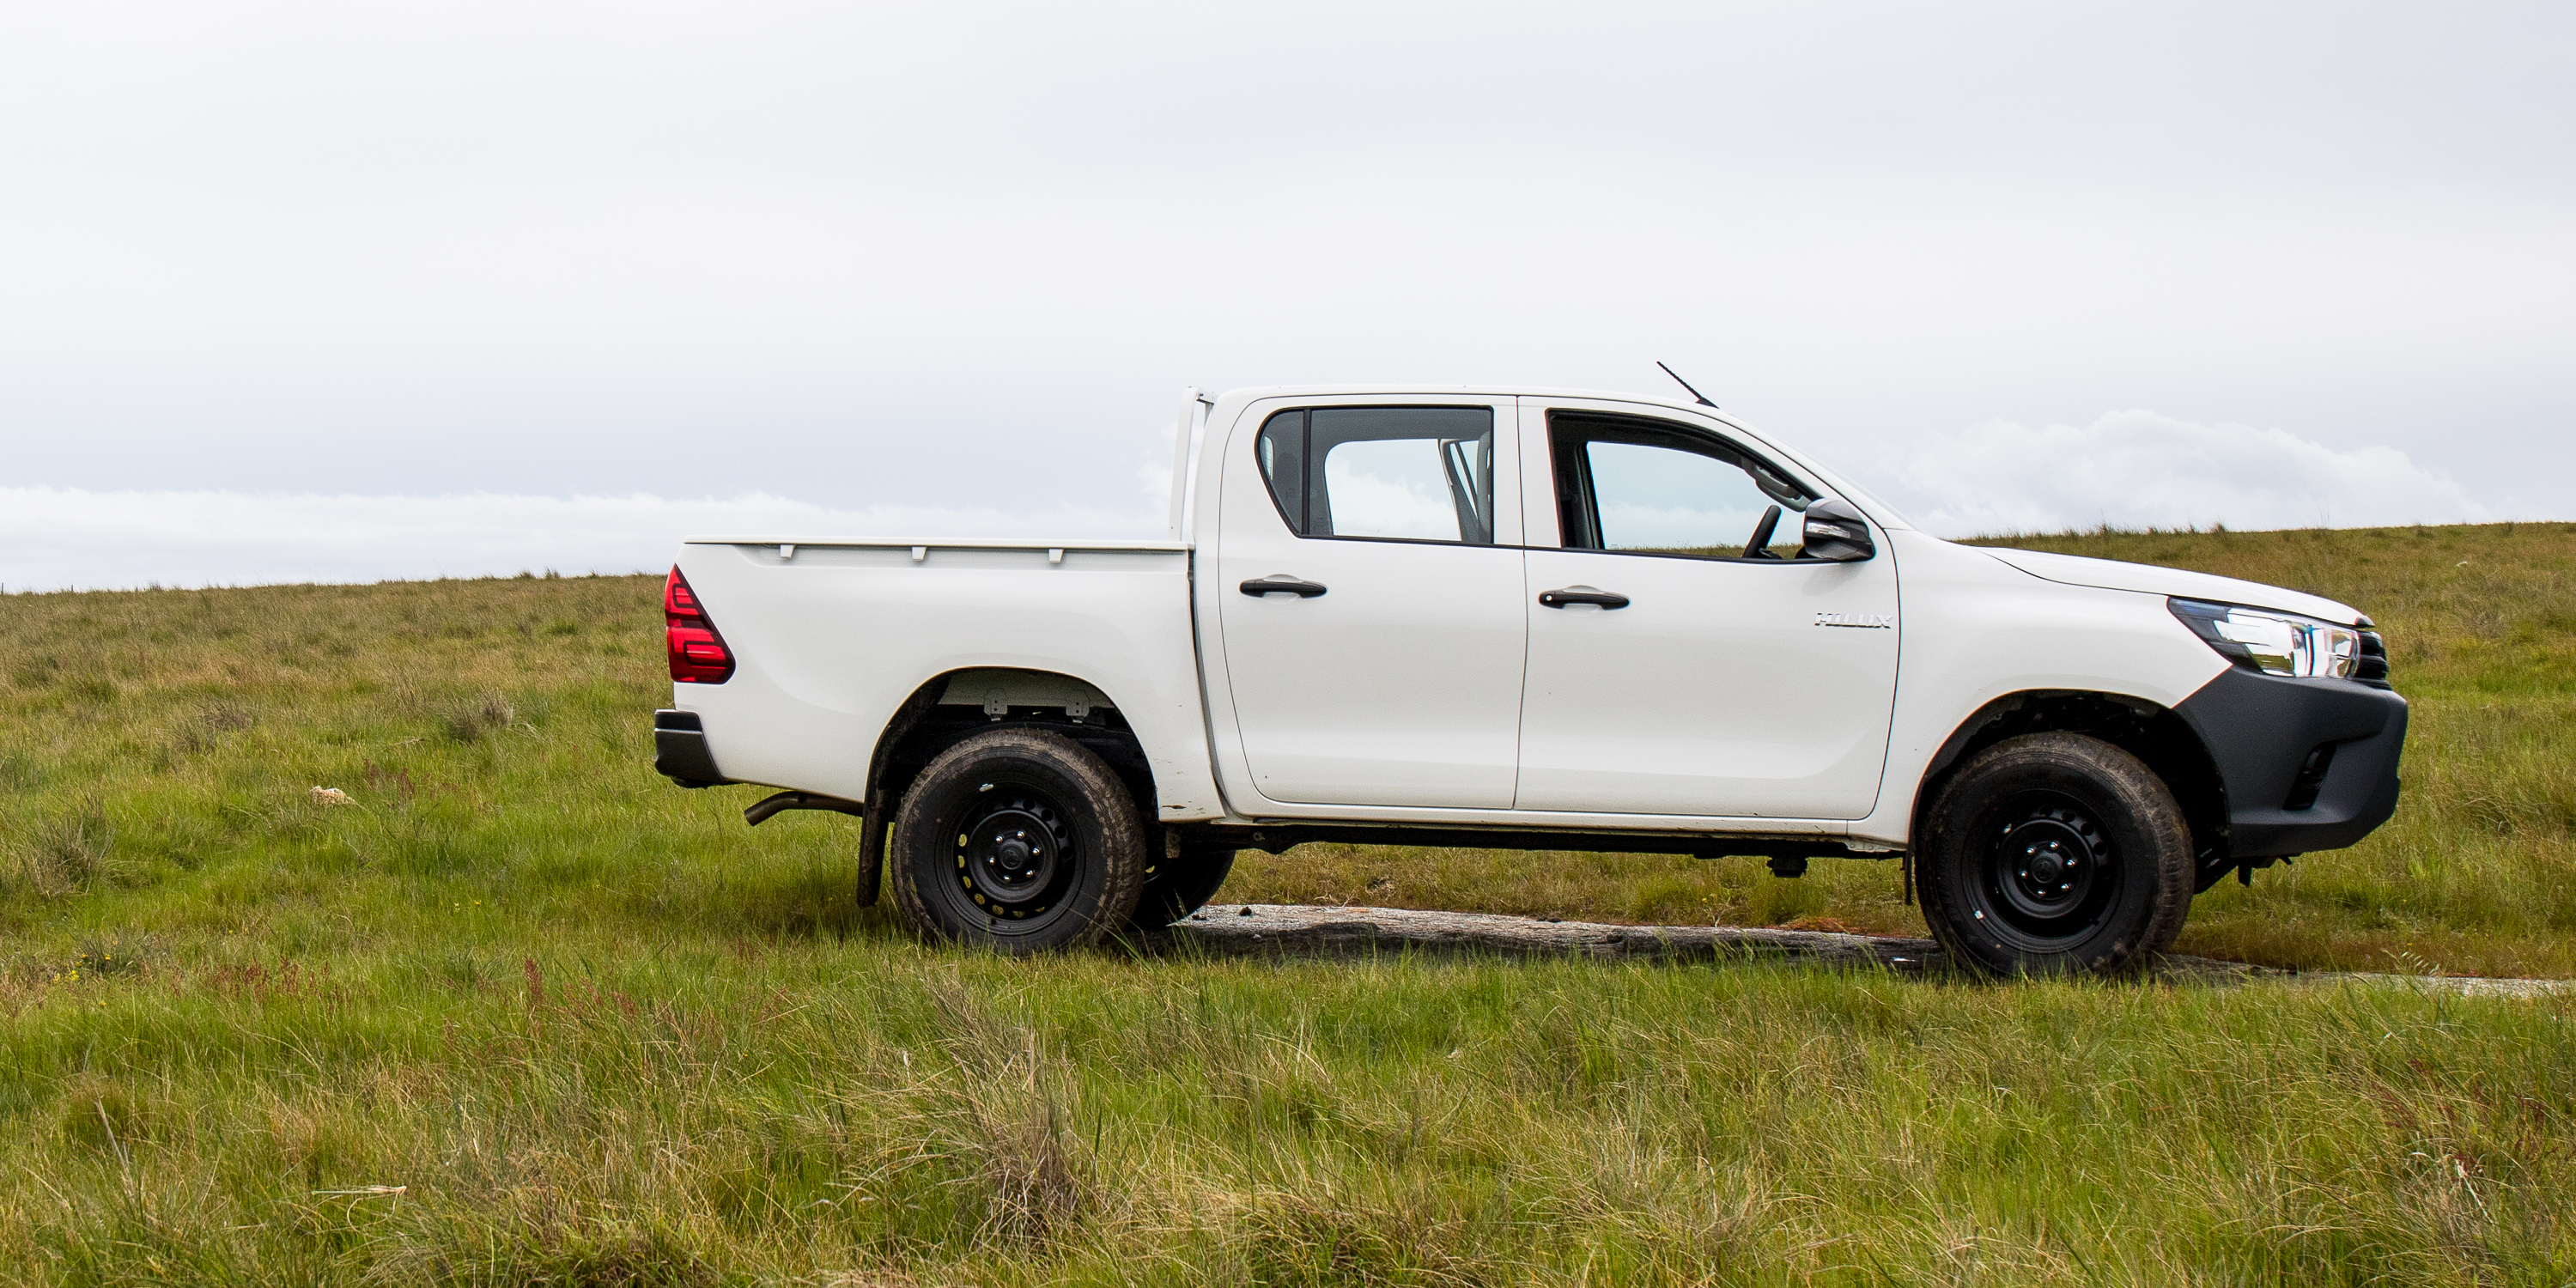 2016 Toyota Hilux WorkMate 4x4 review photos CarAdvice